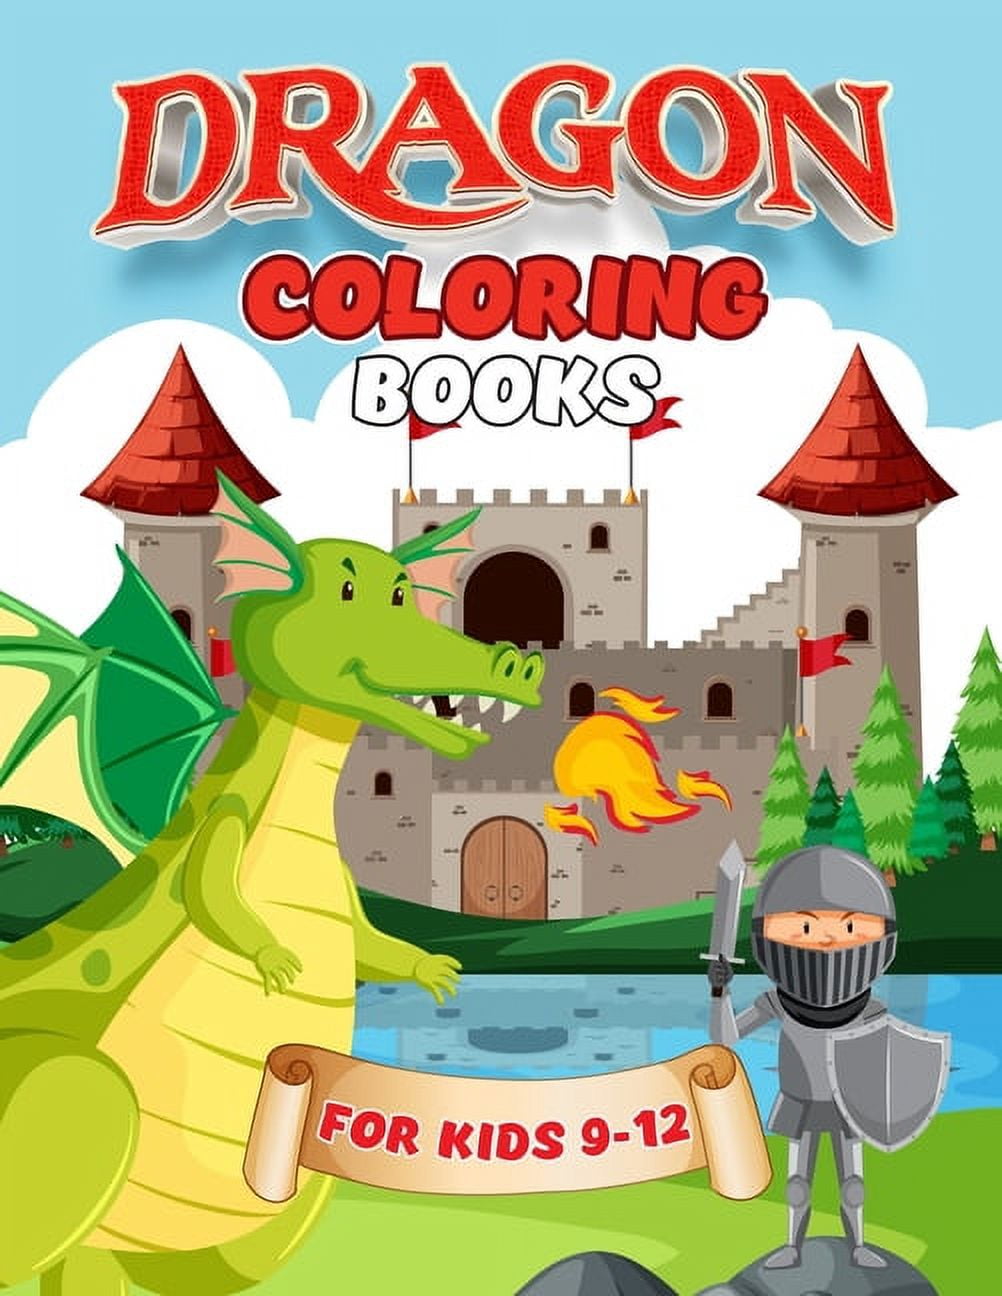 Dragon Coloring Book for Kids Ages 8-12: Coloring and Drawing Pages for  Boys and Girls Who Love Cute Mythical Creatures, Activity Book for Children  wi a book by Leonard Noers